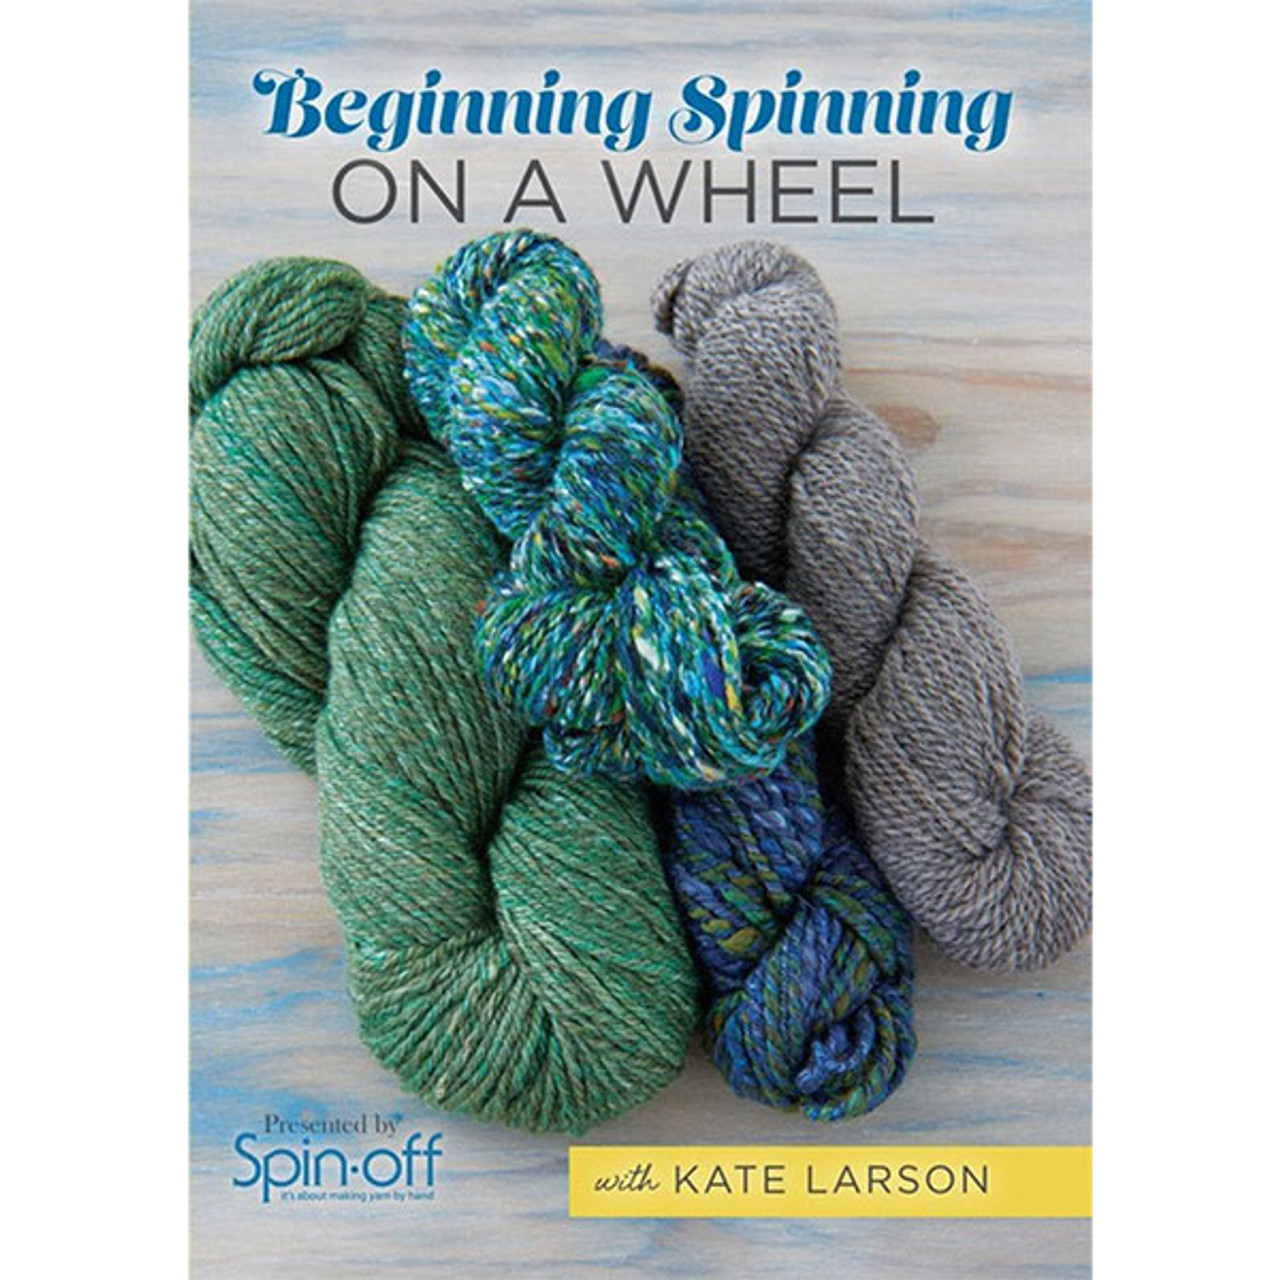 About Add-Ons - Yarn Spinner